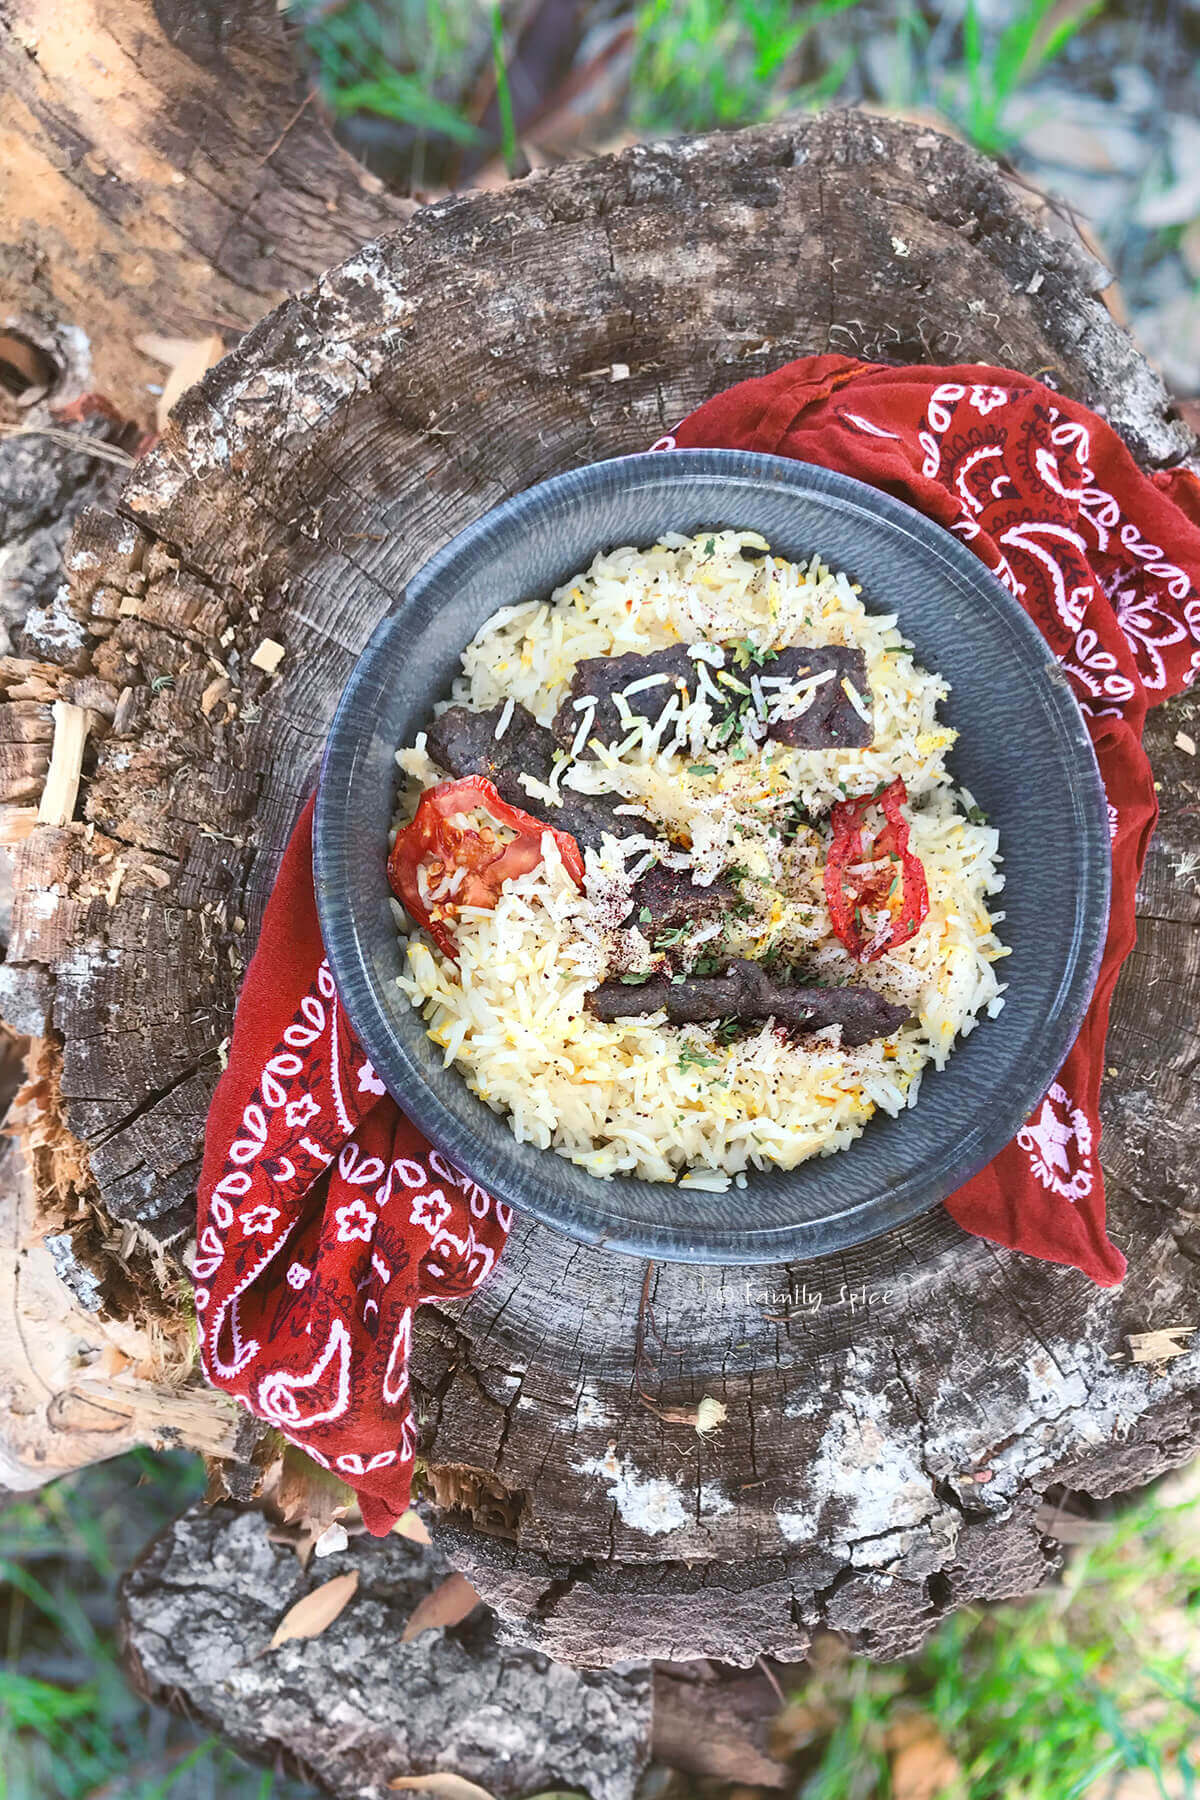 How to Dehydrate Food for Camping & Backpacking